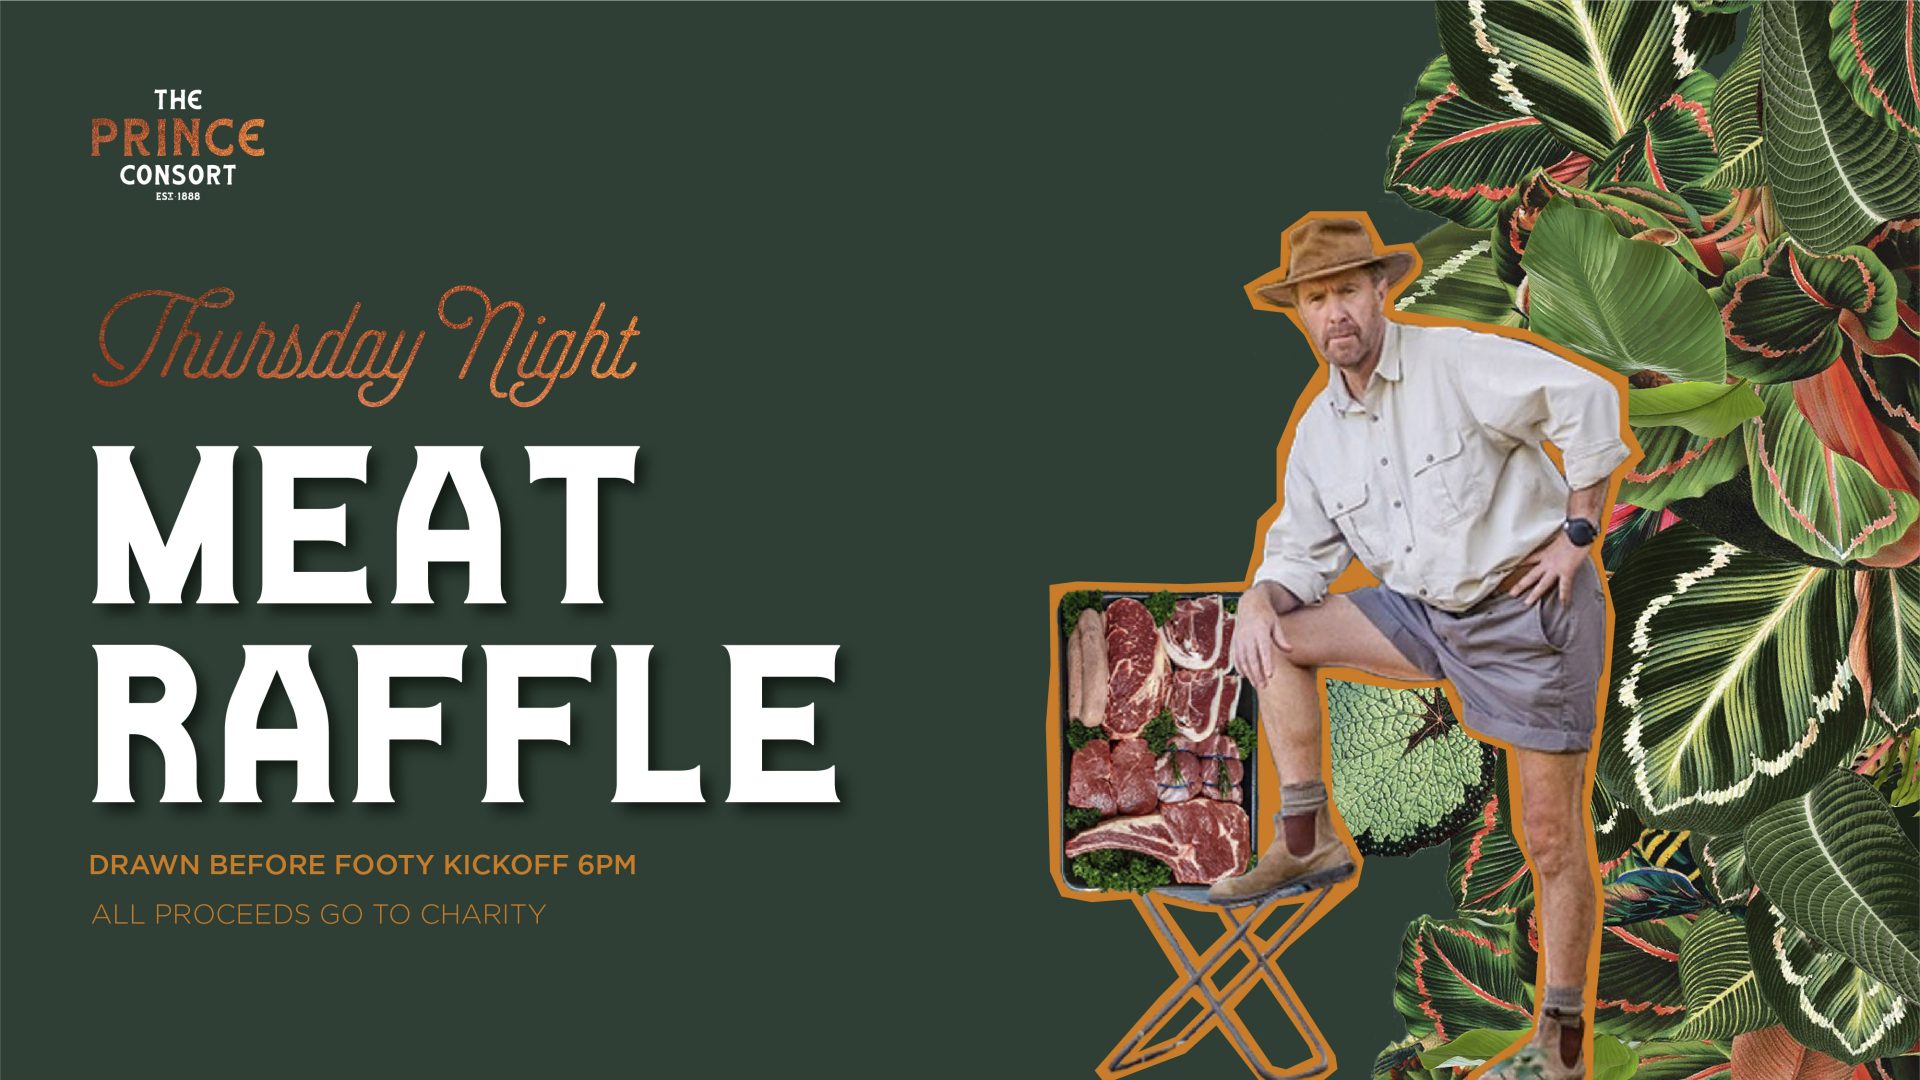 Get Your Tickets to Thursday Meat Raffle | Whats on at The Prince Consort